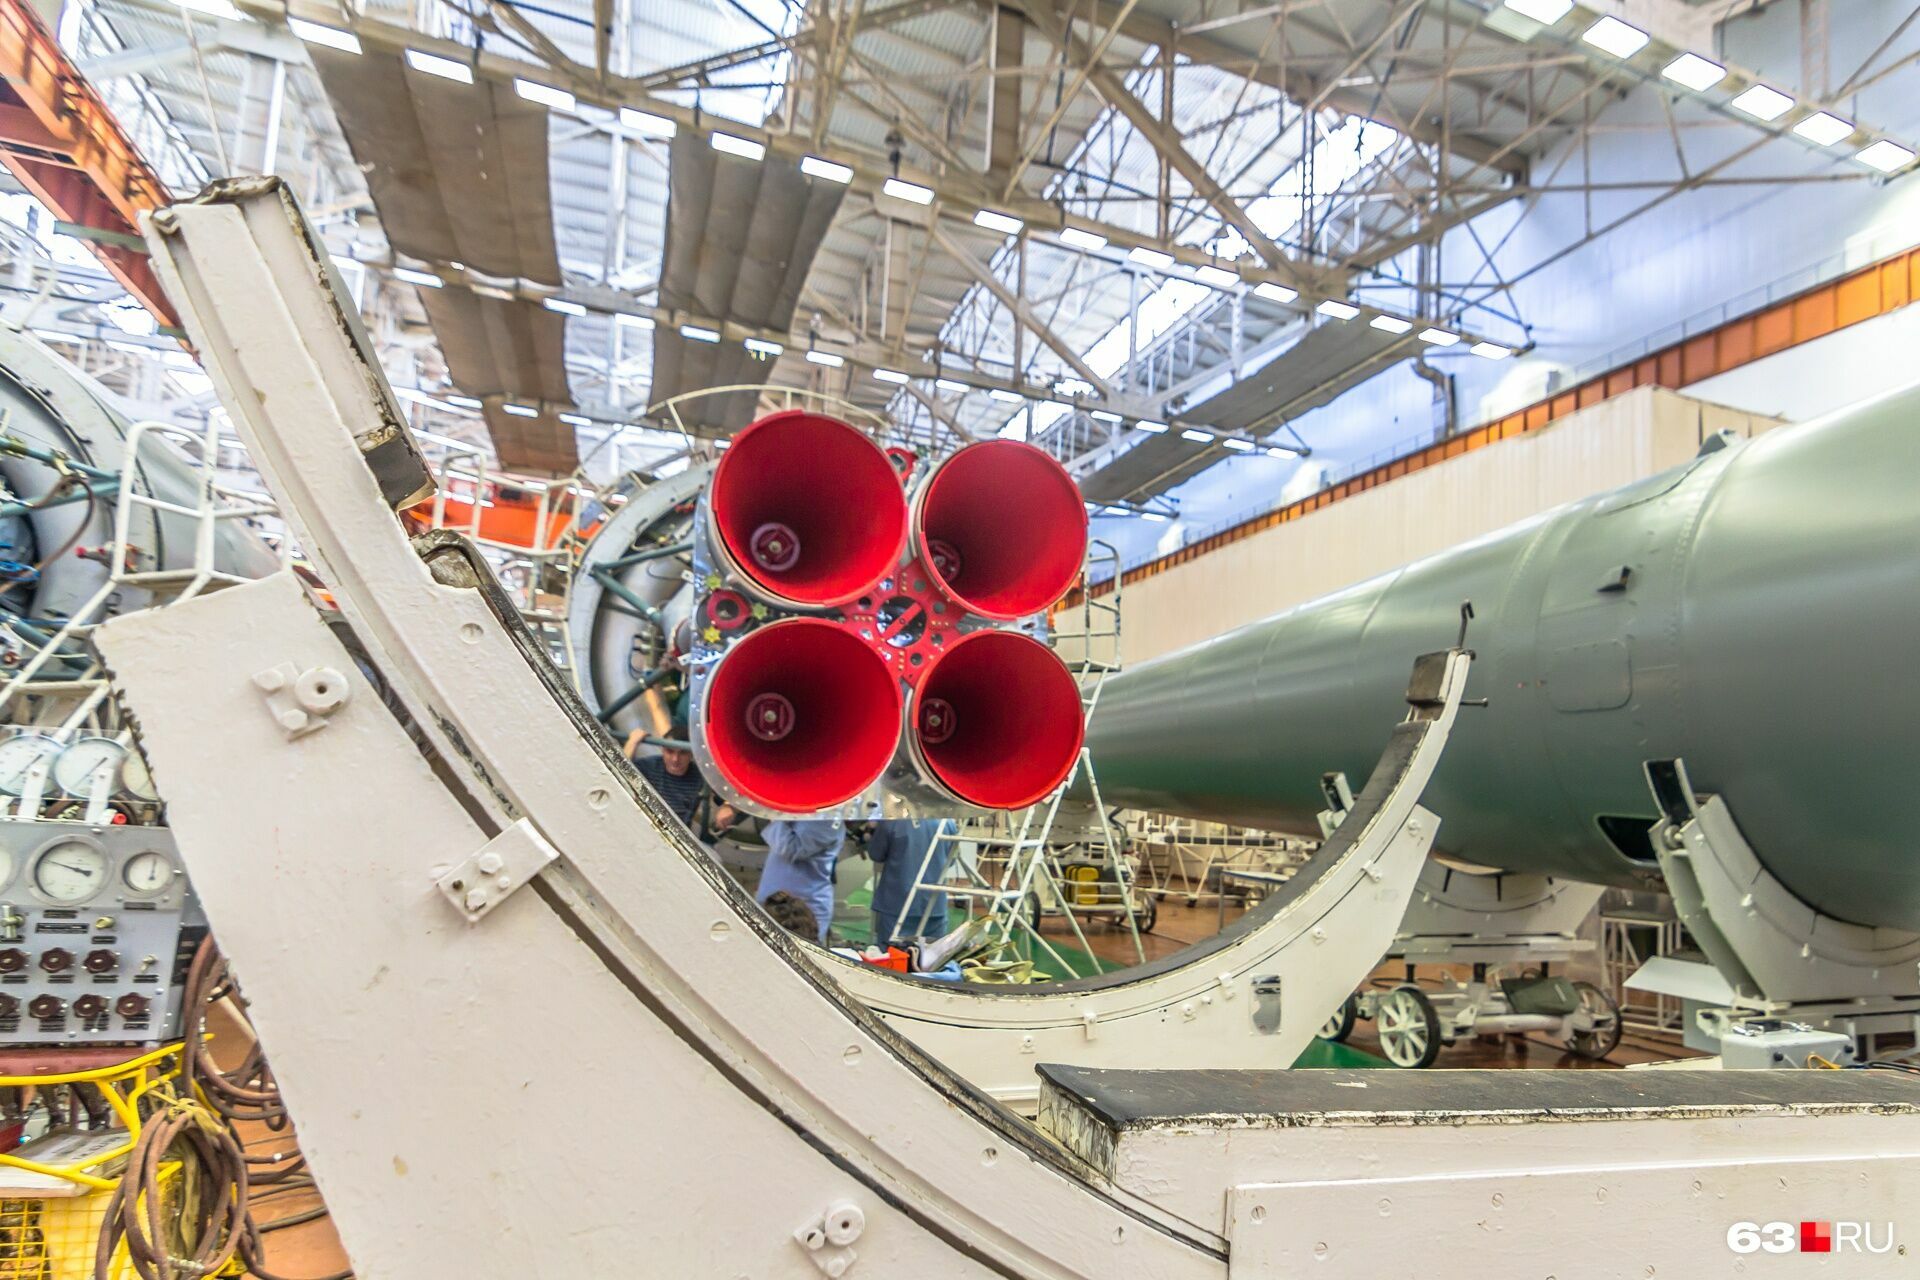 Roscosmos demands more than 4.7 billion rubles from the Progress missile space center